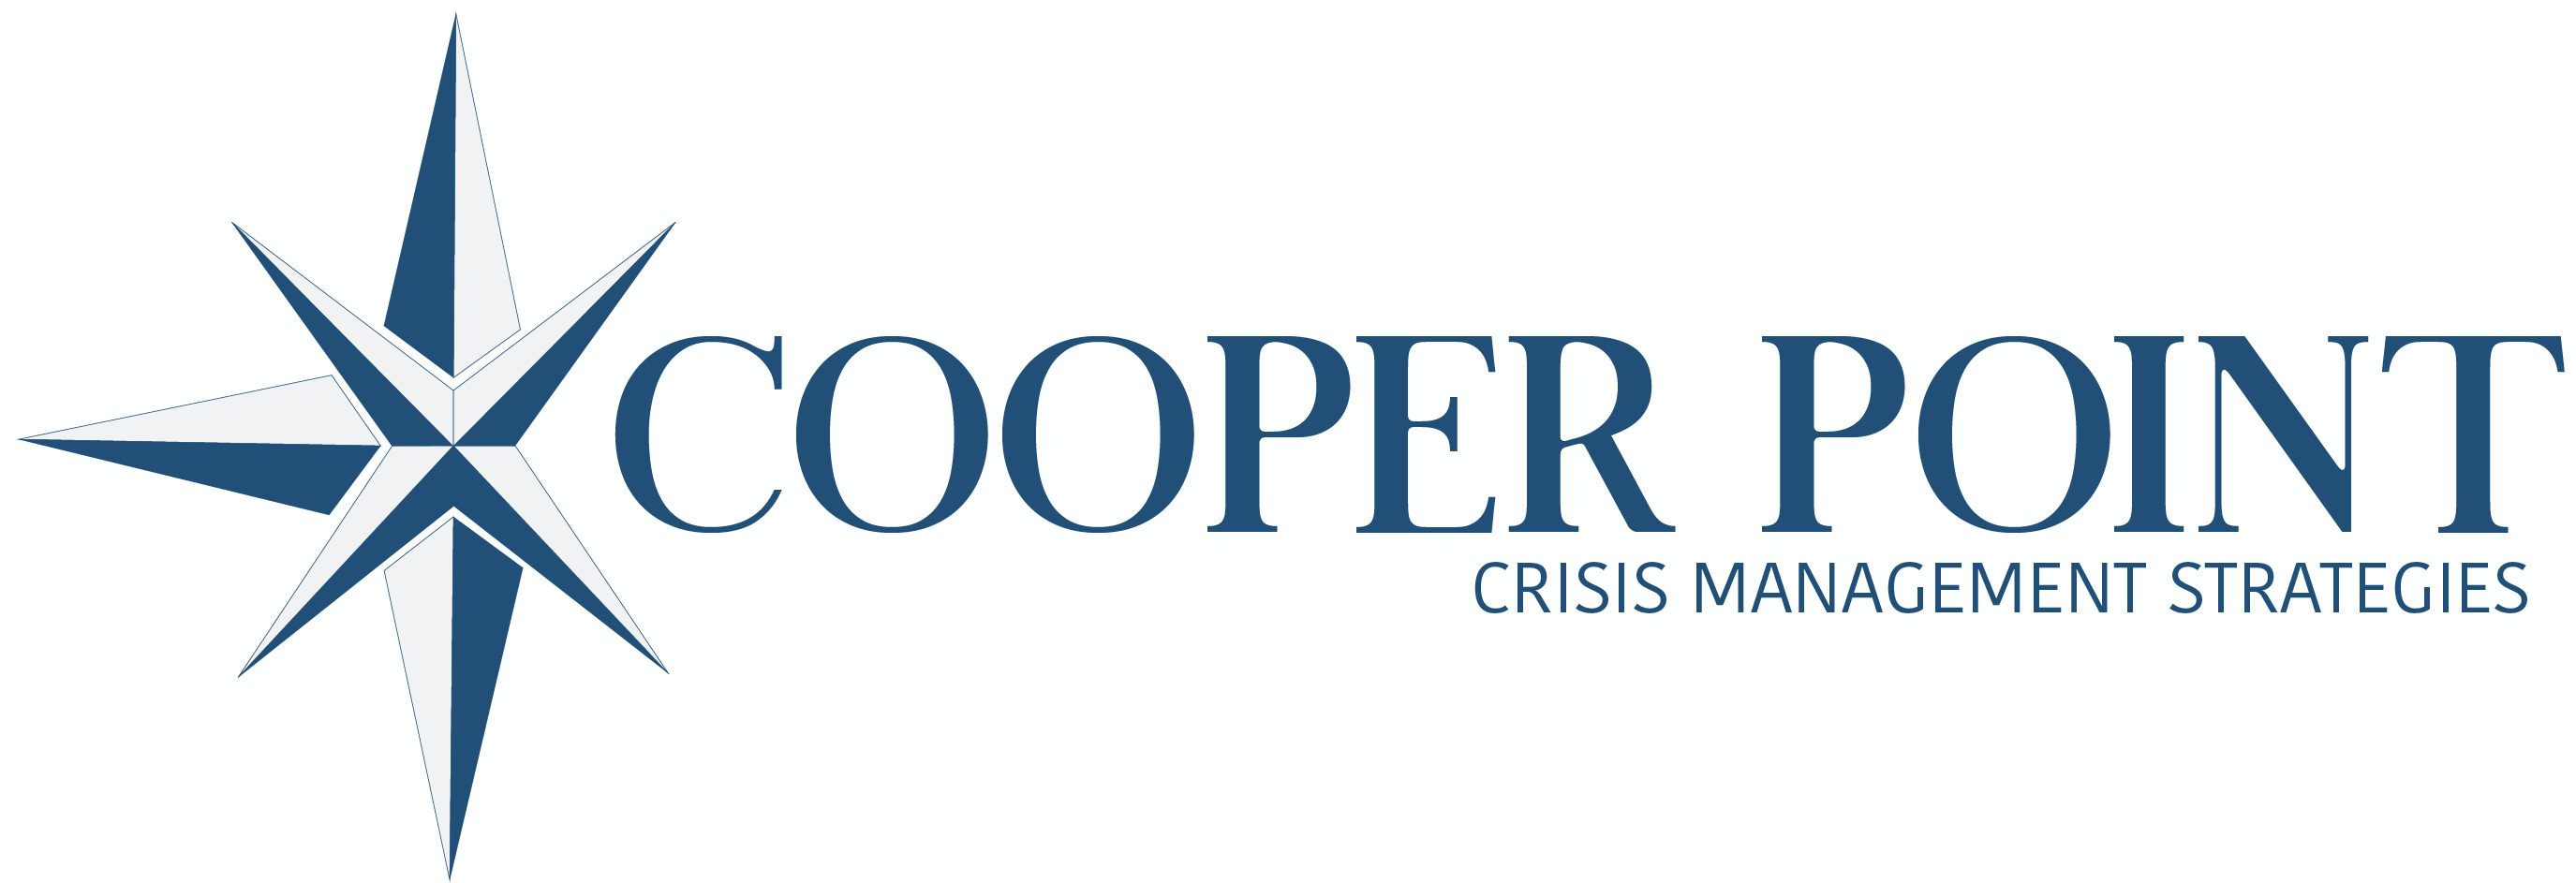 Cooper Point Group